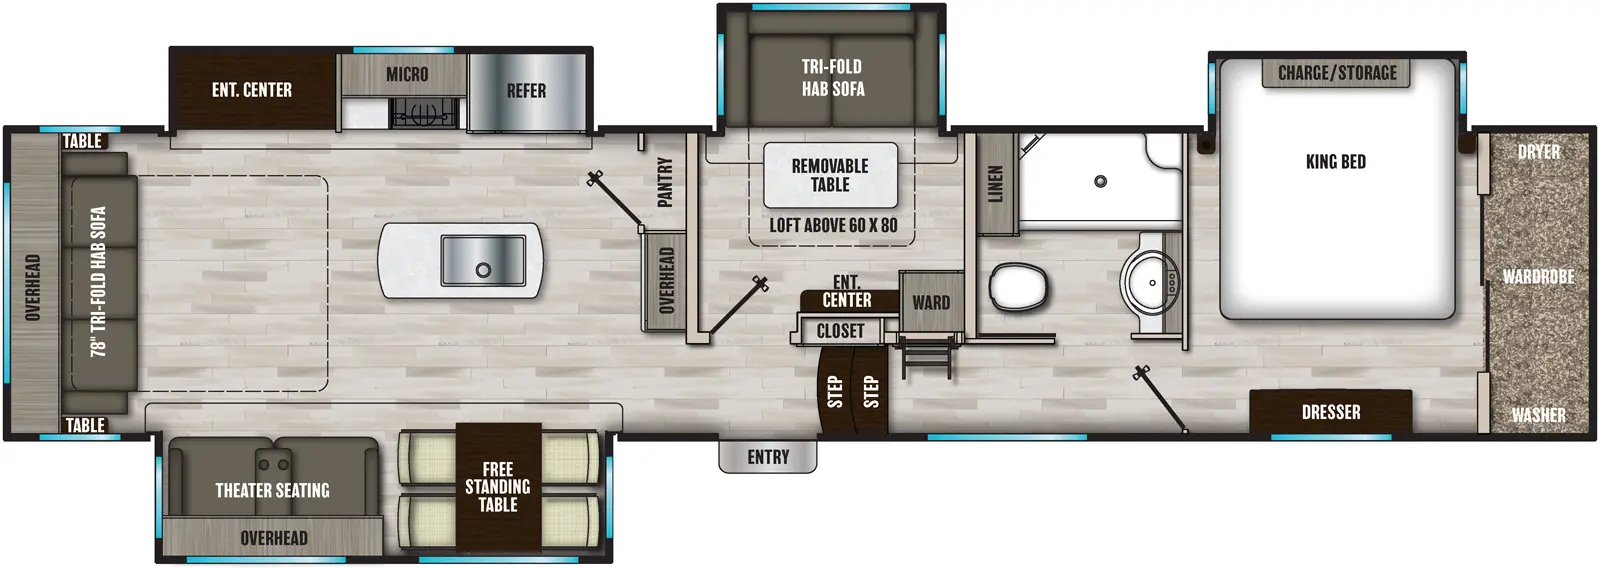 The 393MBX has four slideouts and one entry. Interior layout front to back: front bedroom with front wardrobe with washer and dryer, off-door side king bed slideout, and door side dresser; off-door side full bathroom with linen closet; ladder to loft above mid room; two steps down to the main entry, closet, and mid room with entertainment center and wardrobe along inner wall opposite a tri-fold hide-a-bed sofa slideout with removable table; overhead cabinet and pantry along inner wall; kitchen island with sink; off-door side slideout with refrigerator, microwave, counter, and entertainment center; door side free-standing table, and theater seating with overhead cabinet; rear tri-fold hide-a-bed sofa with overhead cabinet and tables on each side.